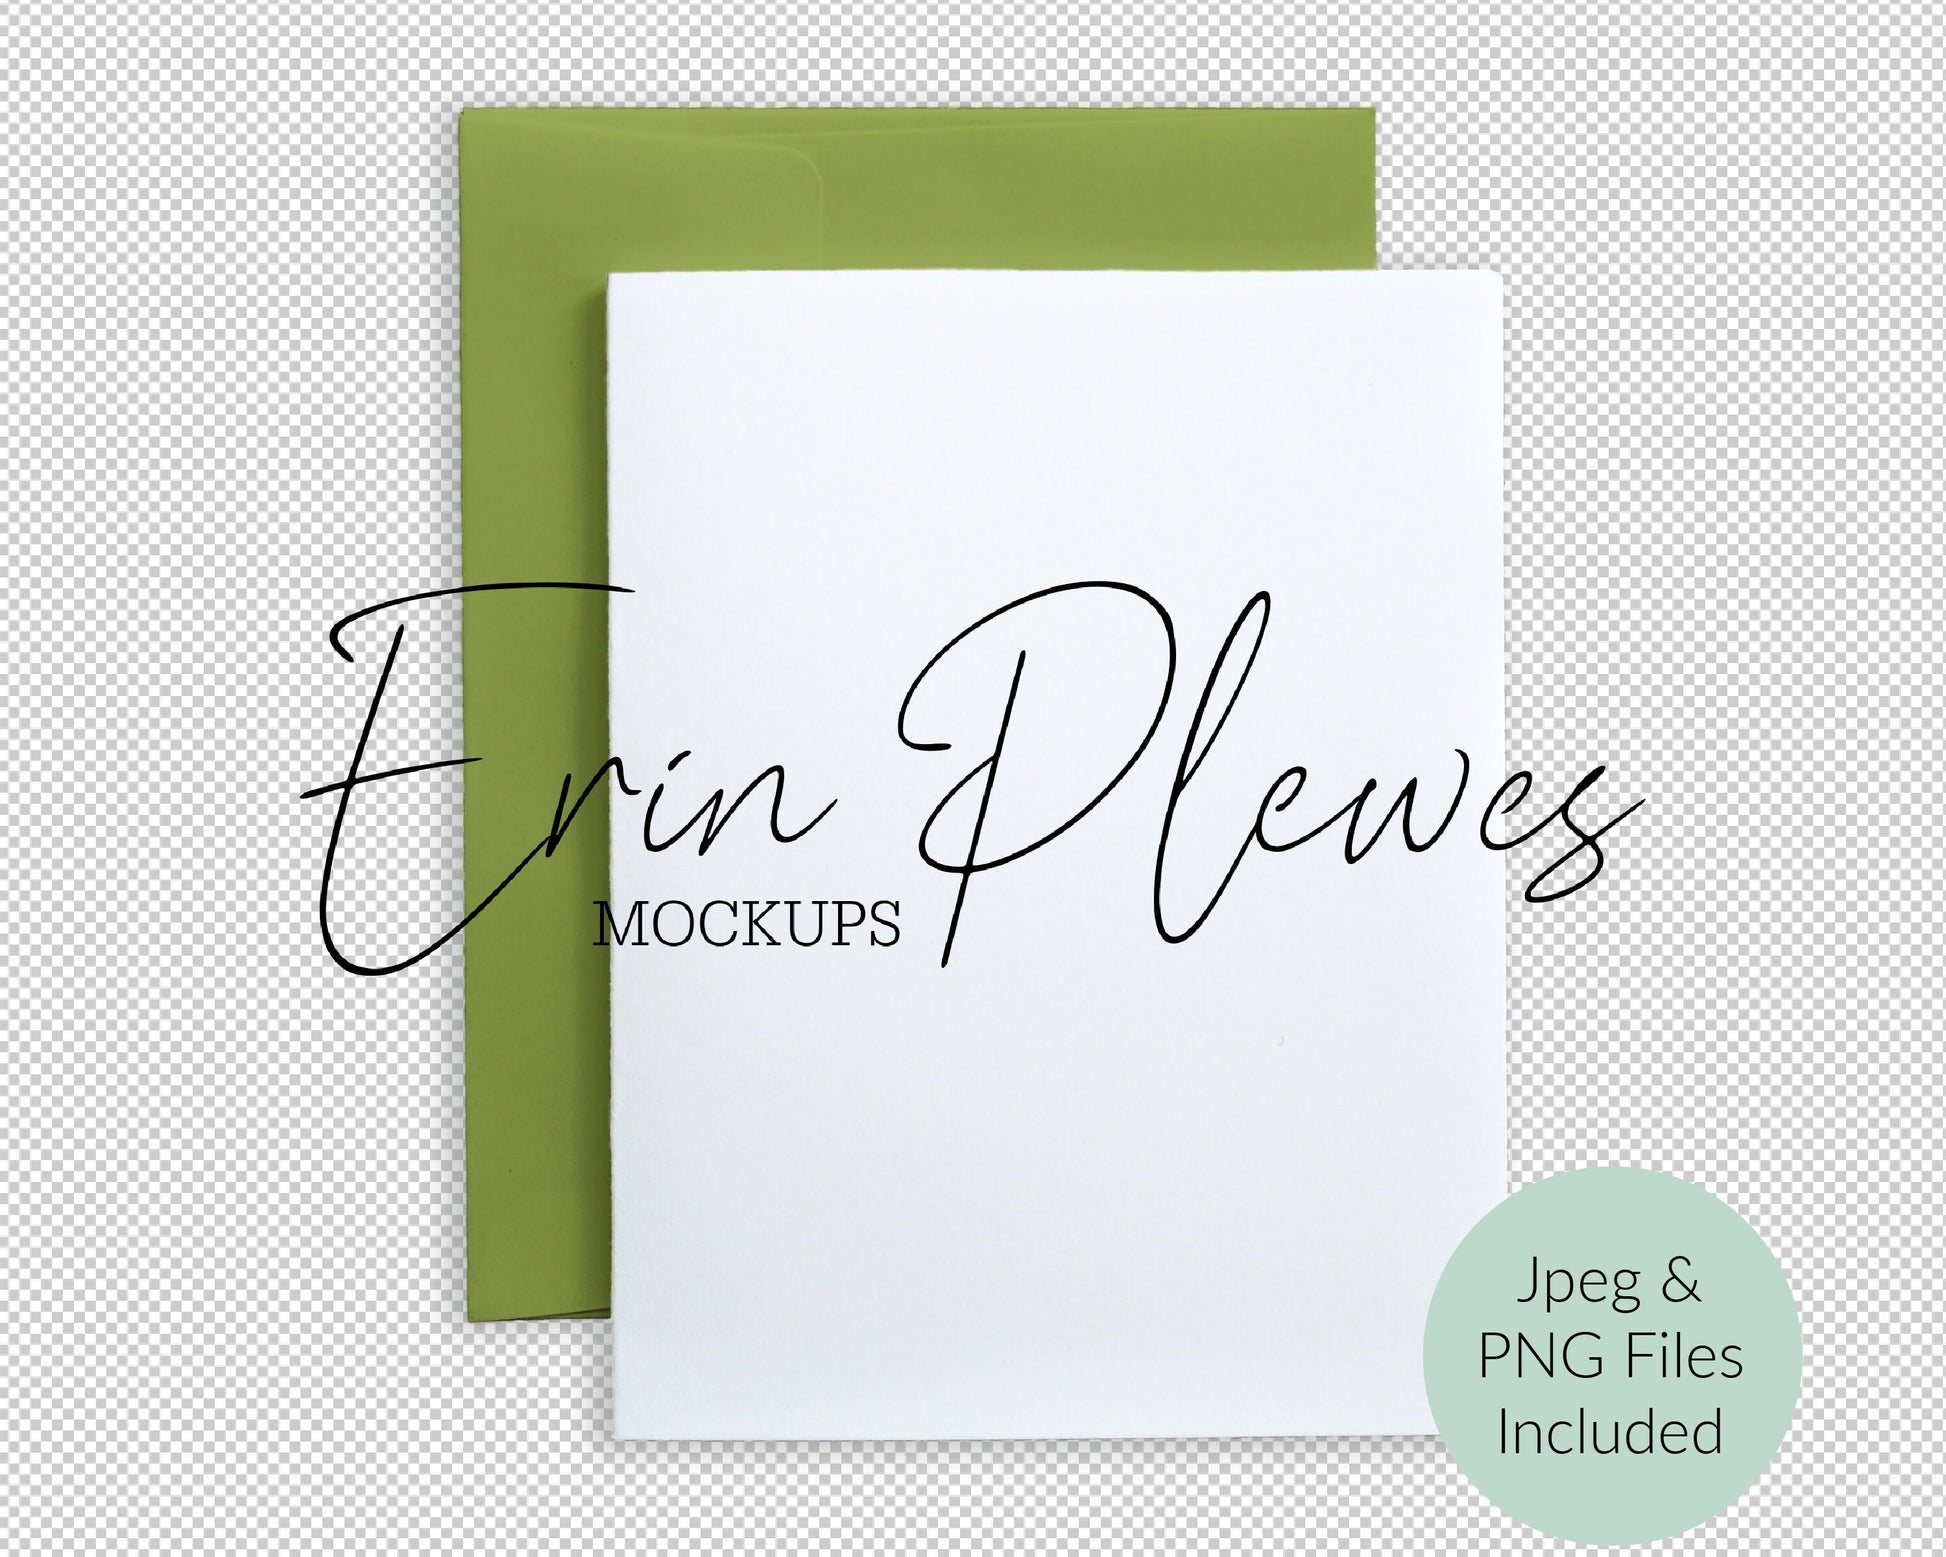 A2 card mockup with green envelope PNG, Invite mock up with white background,  Jpeg PNG Instant Digital Download Template